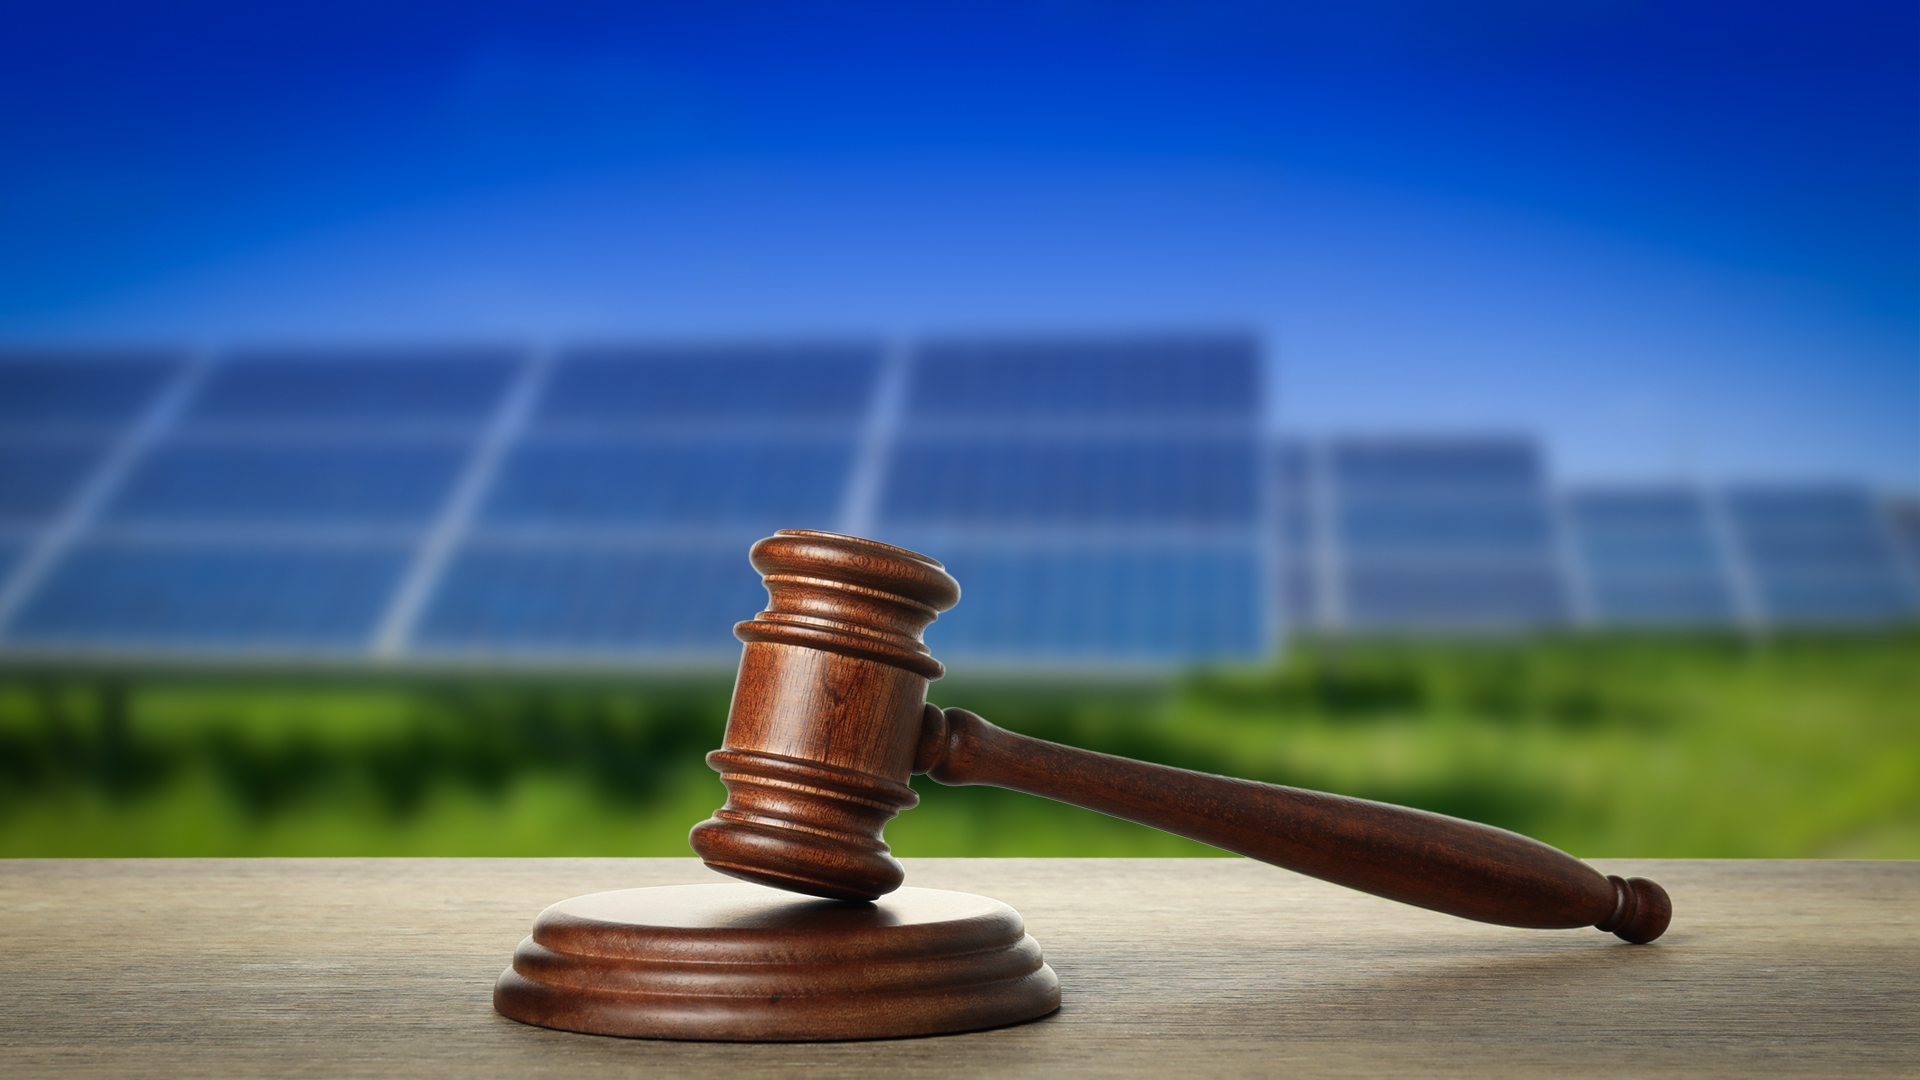  The first solar photovoltaic auction has been announced in Azerbaijan